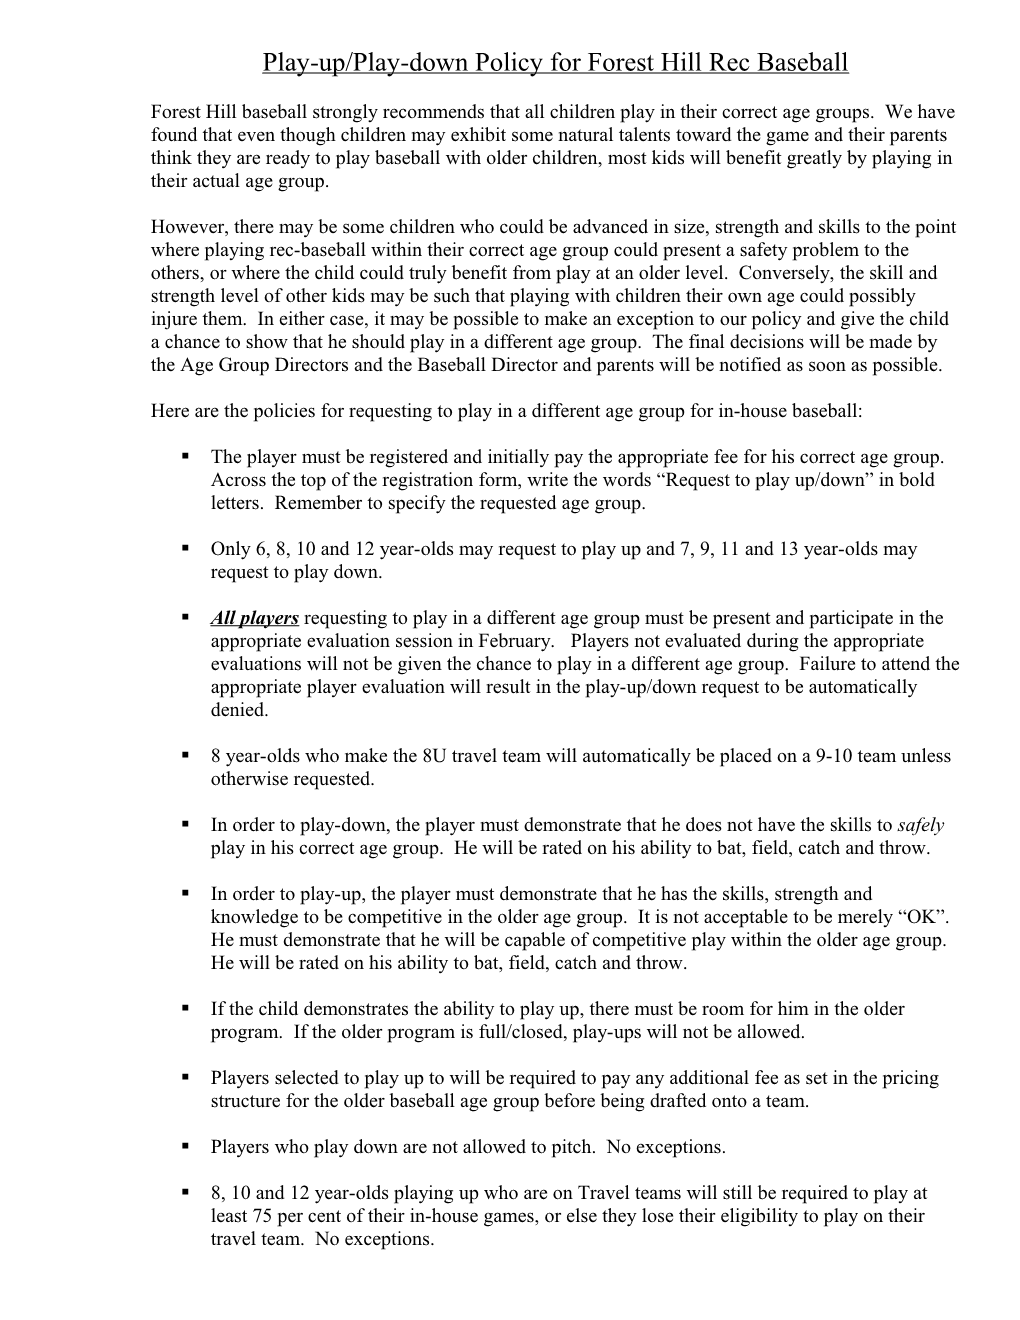 2006 Play-Up/Play-Down Policy for Forest Hill Baseball